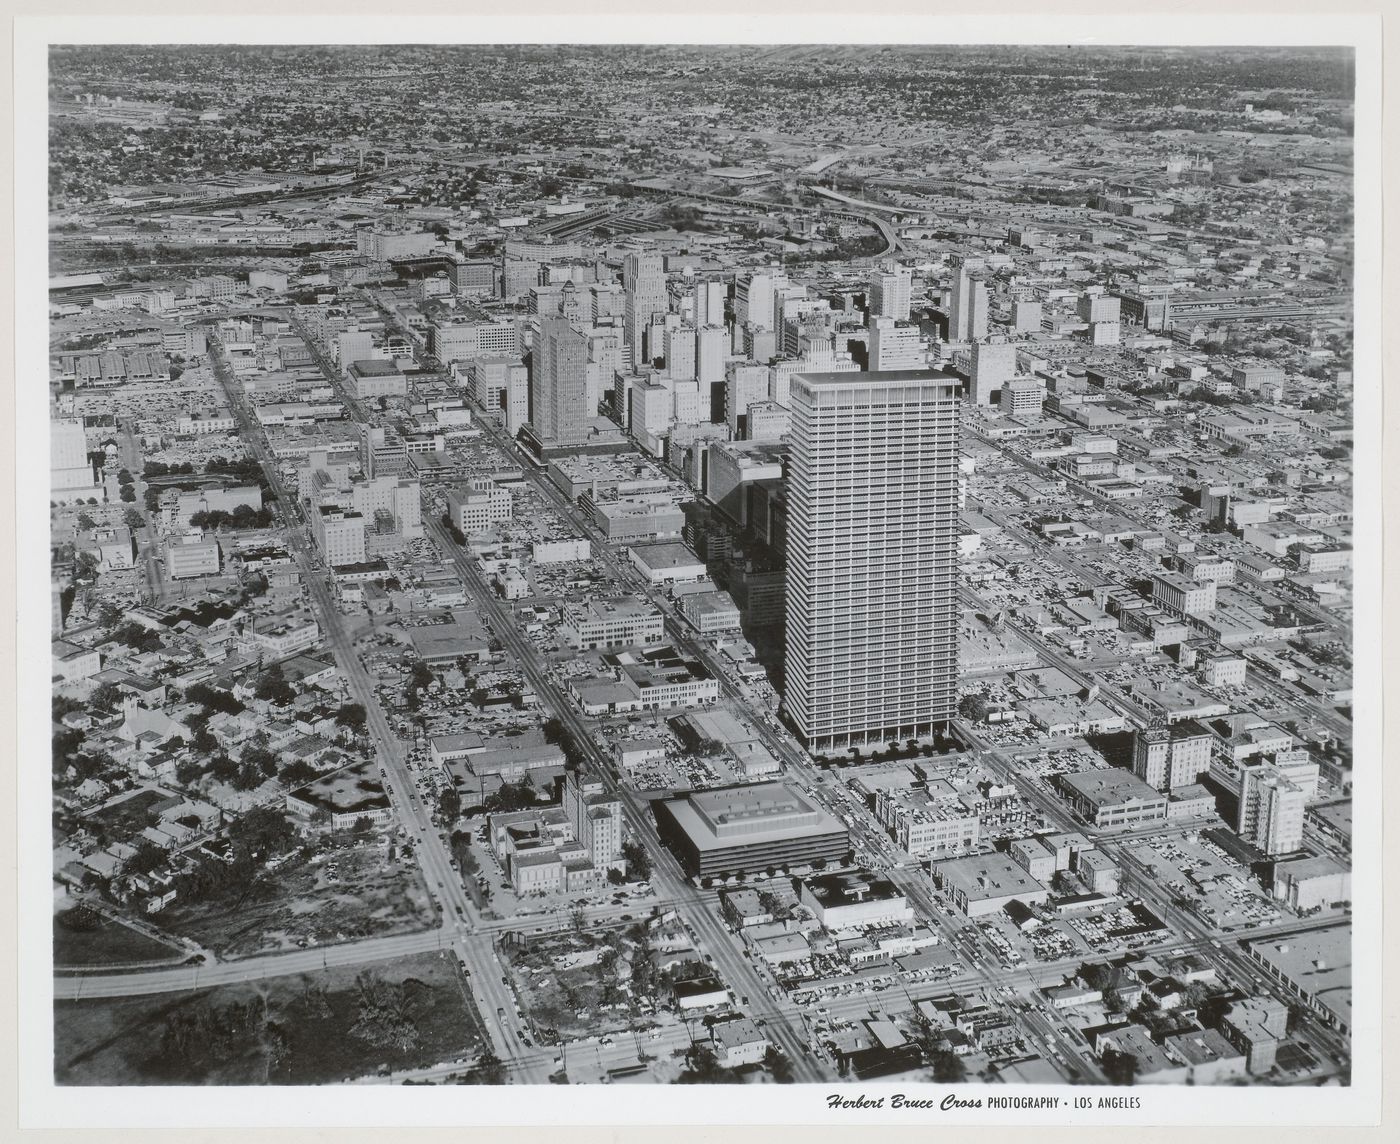 Aerial view of the model of the Humble Oil building and surrounding city area, Houston, Texas, United States